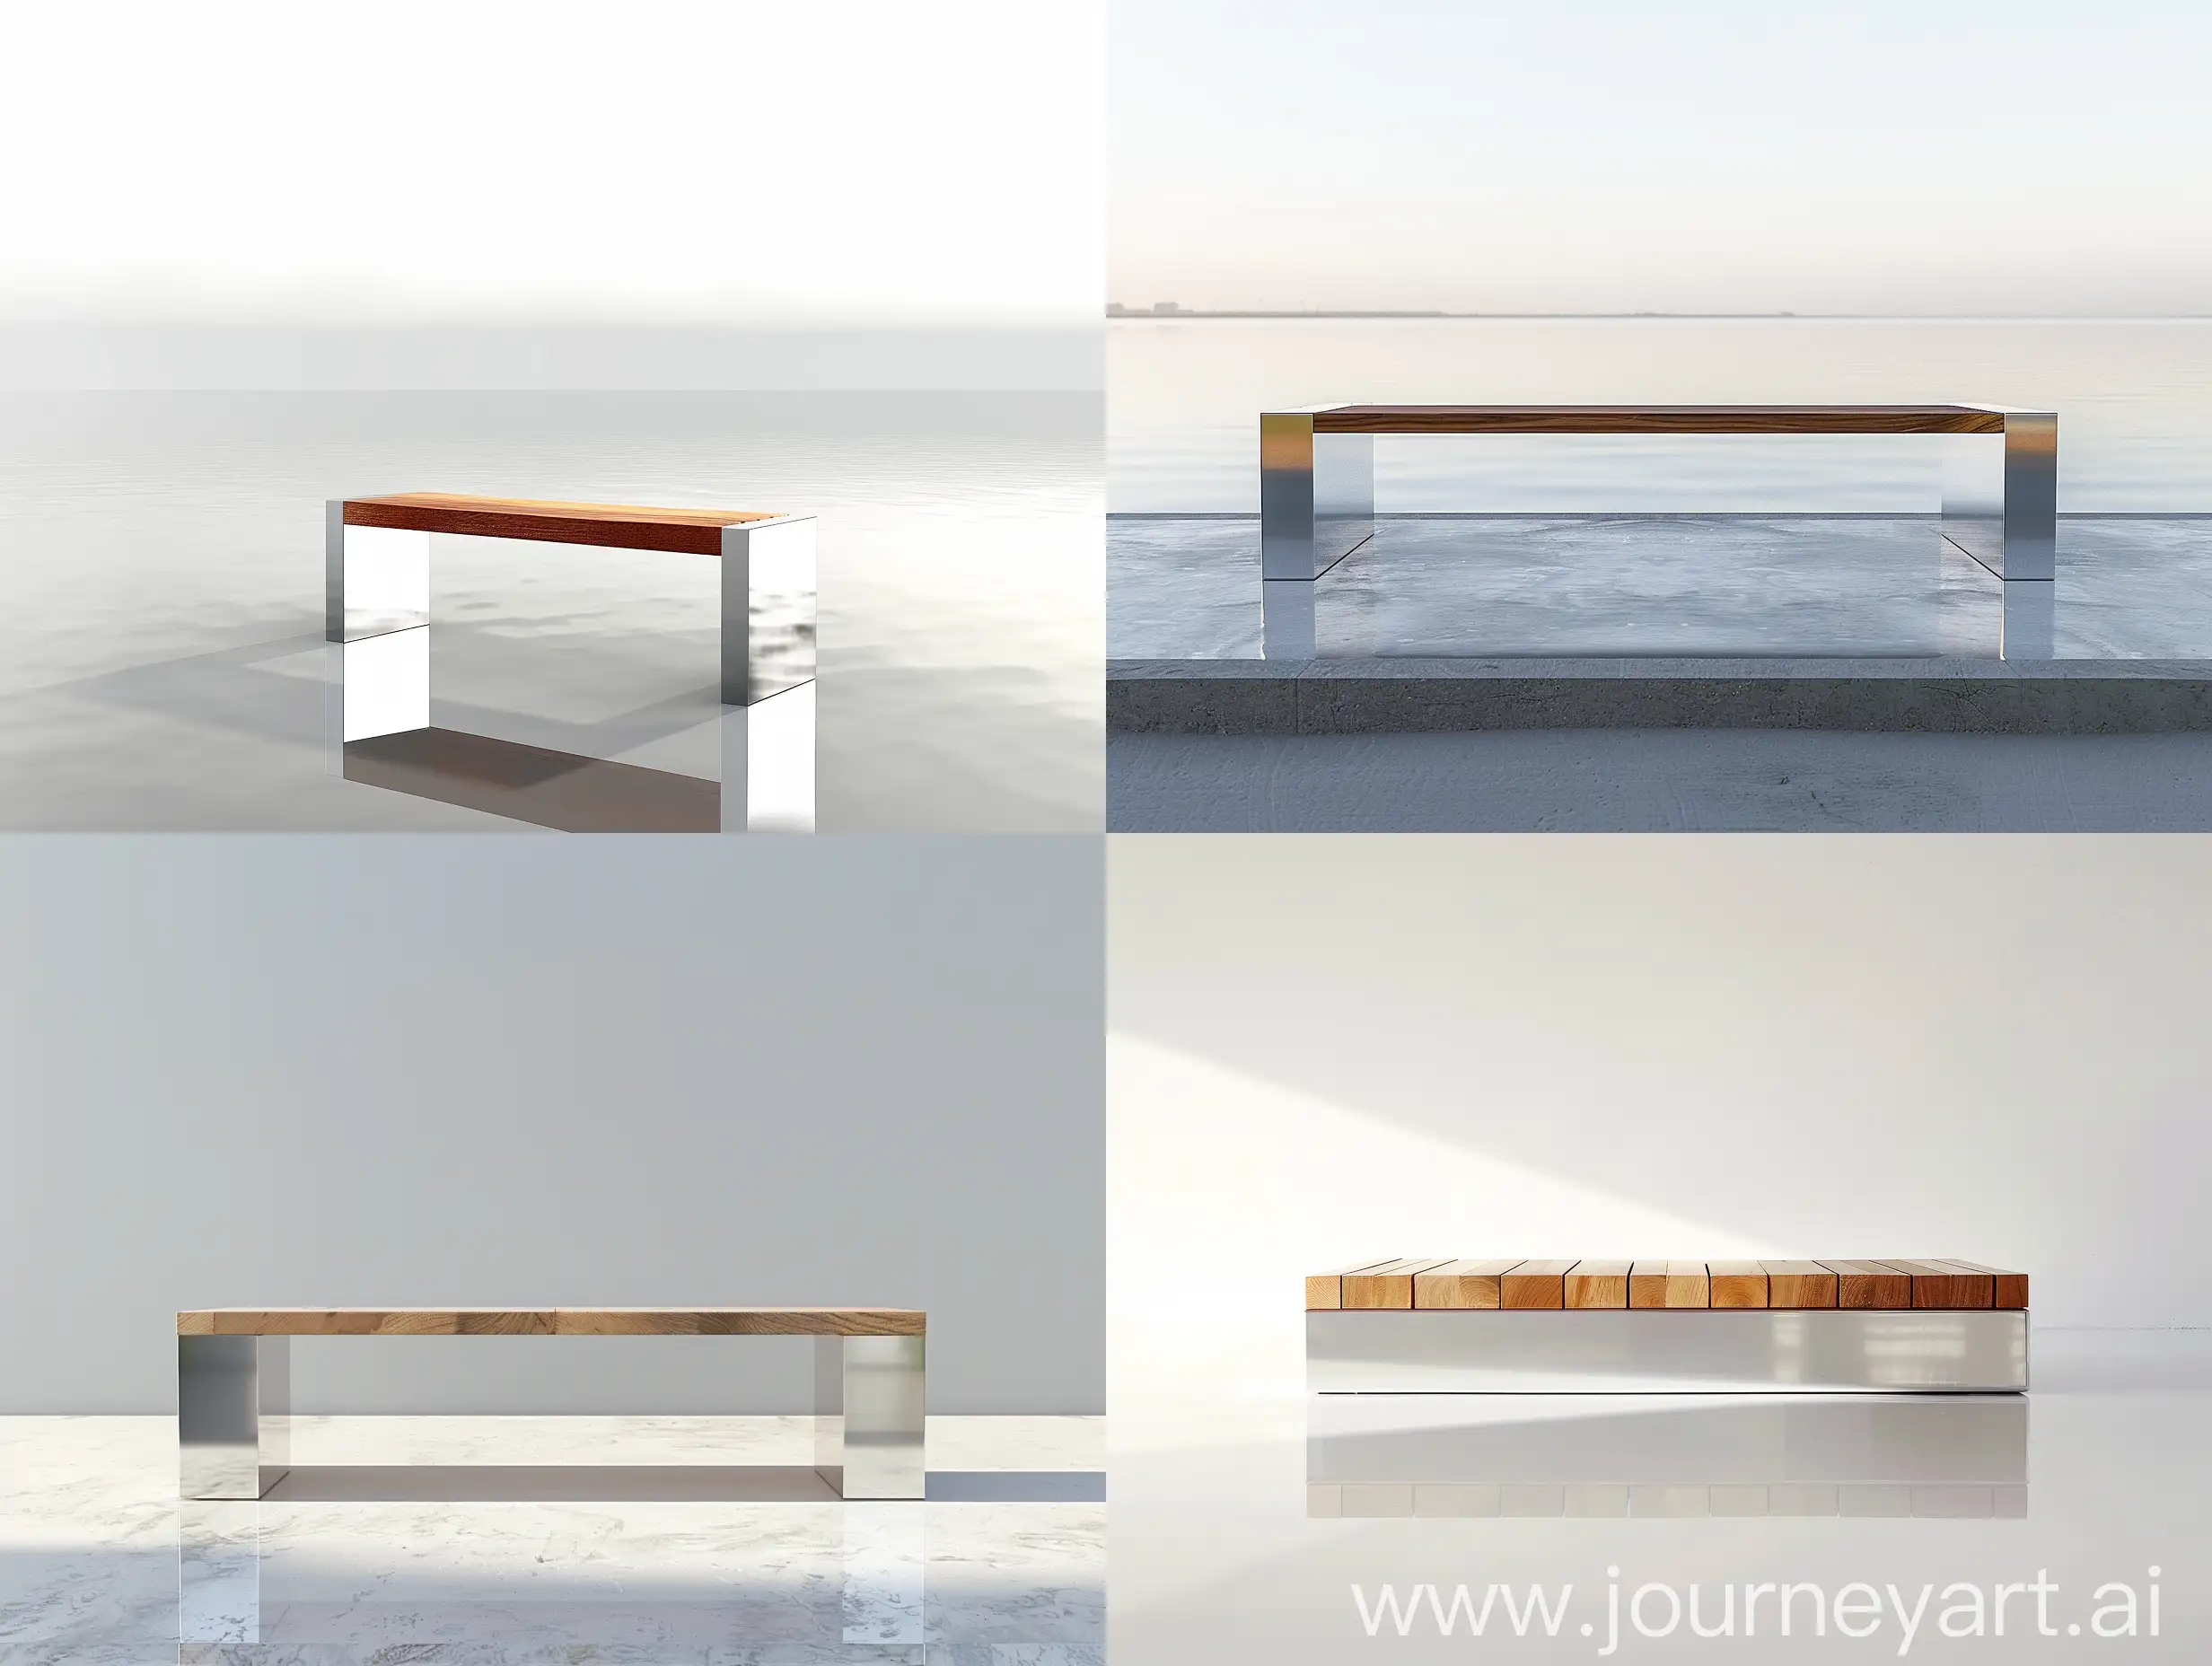 Minimalist Reflection Bench:"Design a Minimalist Reflection Bench with a simple, linear design and reflective surfaces. The bench should be 3 meters long, 0.5 meters wide, and 0.9 meters high, made of polished stainless steel and teak or cedar wood. It should feature clean lines and geometric shapes, designed to interact with natural light and promote introspection and meditation. Reflective silver surfaces paired with natural wood tones create a minimalist and modern aesthetic. This bench is intended for Chitgar Lake, Tehran, overlooking the water."The Minimalist Reflection Bench features a simple, linear design with reflective surfaces. Measuring 3 meters in length, 0.5 meters in width, and 0.9 meters in height, it is composed of polished stainless steel for the reflective surfaces and teak or cedar wood for the seating area. The bench has clean lines and geometric shapes, designed to interact with natural light and promote introspection and meditation. Reflective silver surfaces are paired with natural wood tones, creating a minimalist and modern aesthetic. This bench is intended to be placed at Chitgar Lake, Tehran, overlooking the water.